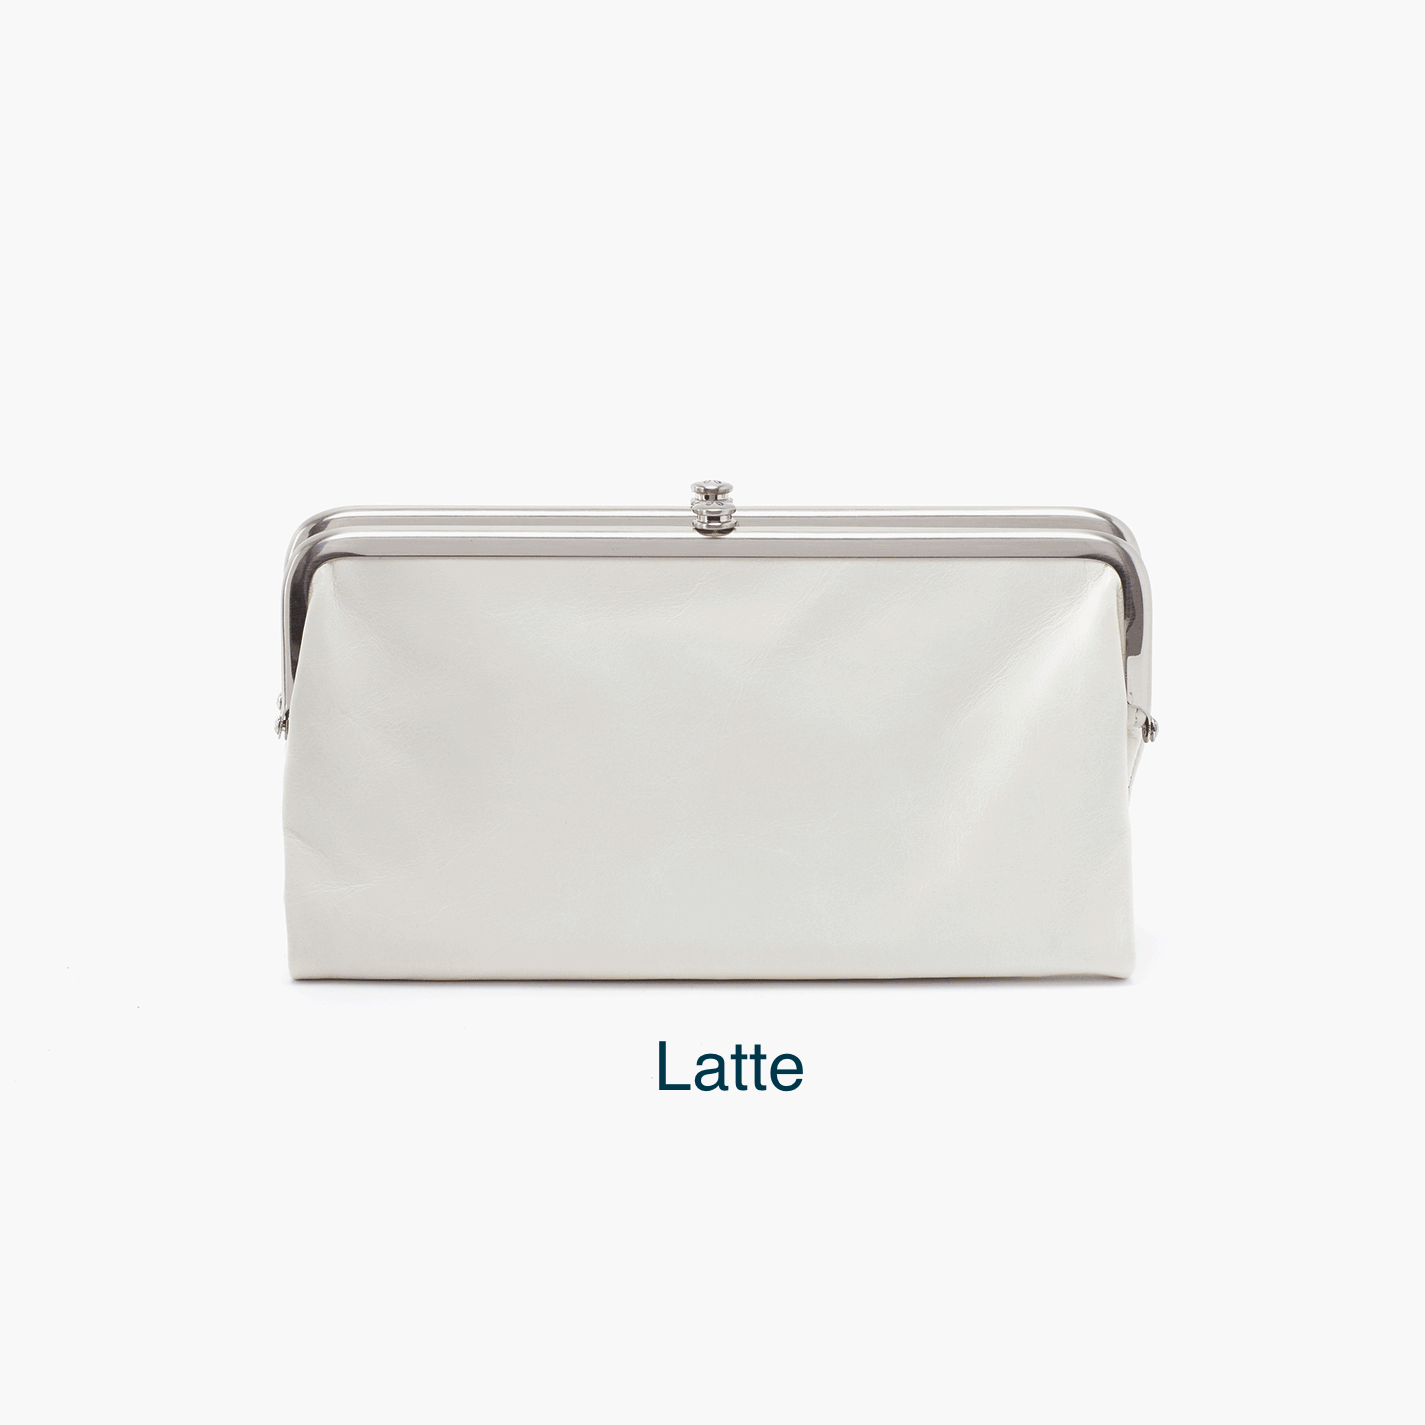 As seen on InStyle.com as “the answer to your handbag prayers”, the Lauren wallet & convertible clutch is loved by a million women & counting. Crafted in our signature vintage hide leather that only gets more beautiful over time with use and wear.